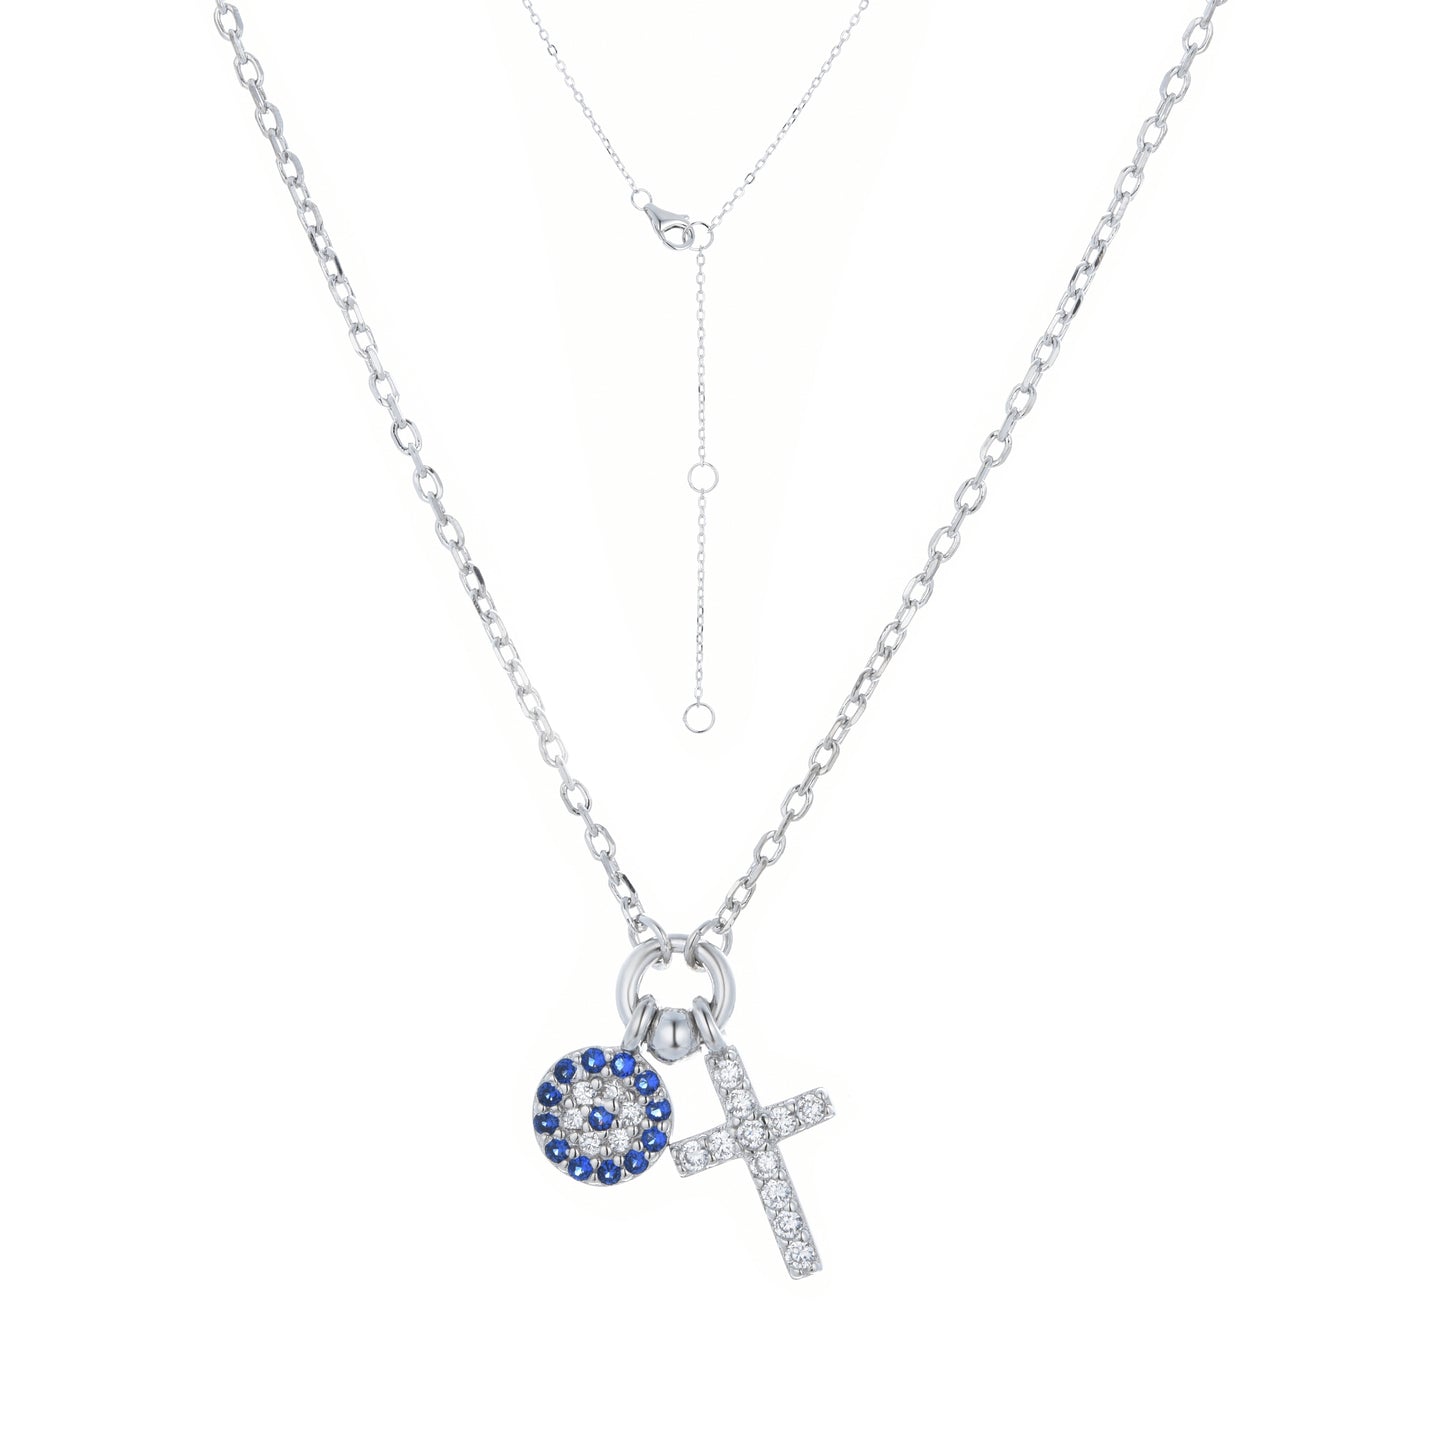 ALEXIA EVIL EYE AND CROSS SILVER NECKLACE